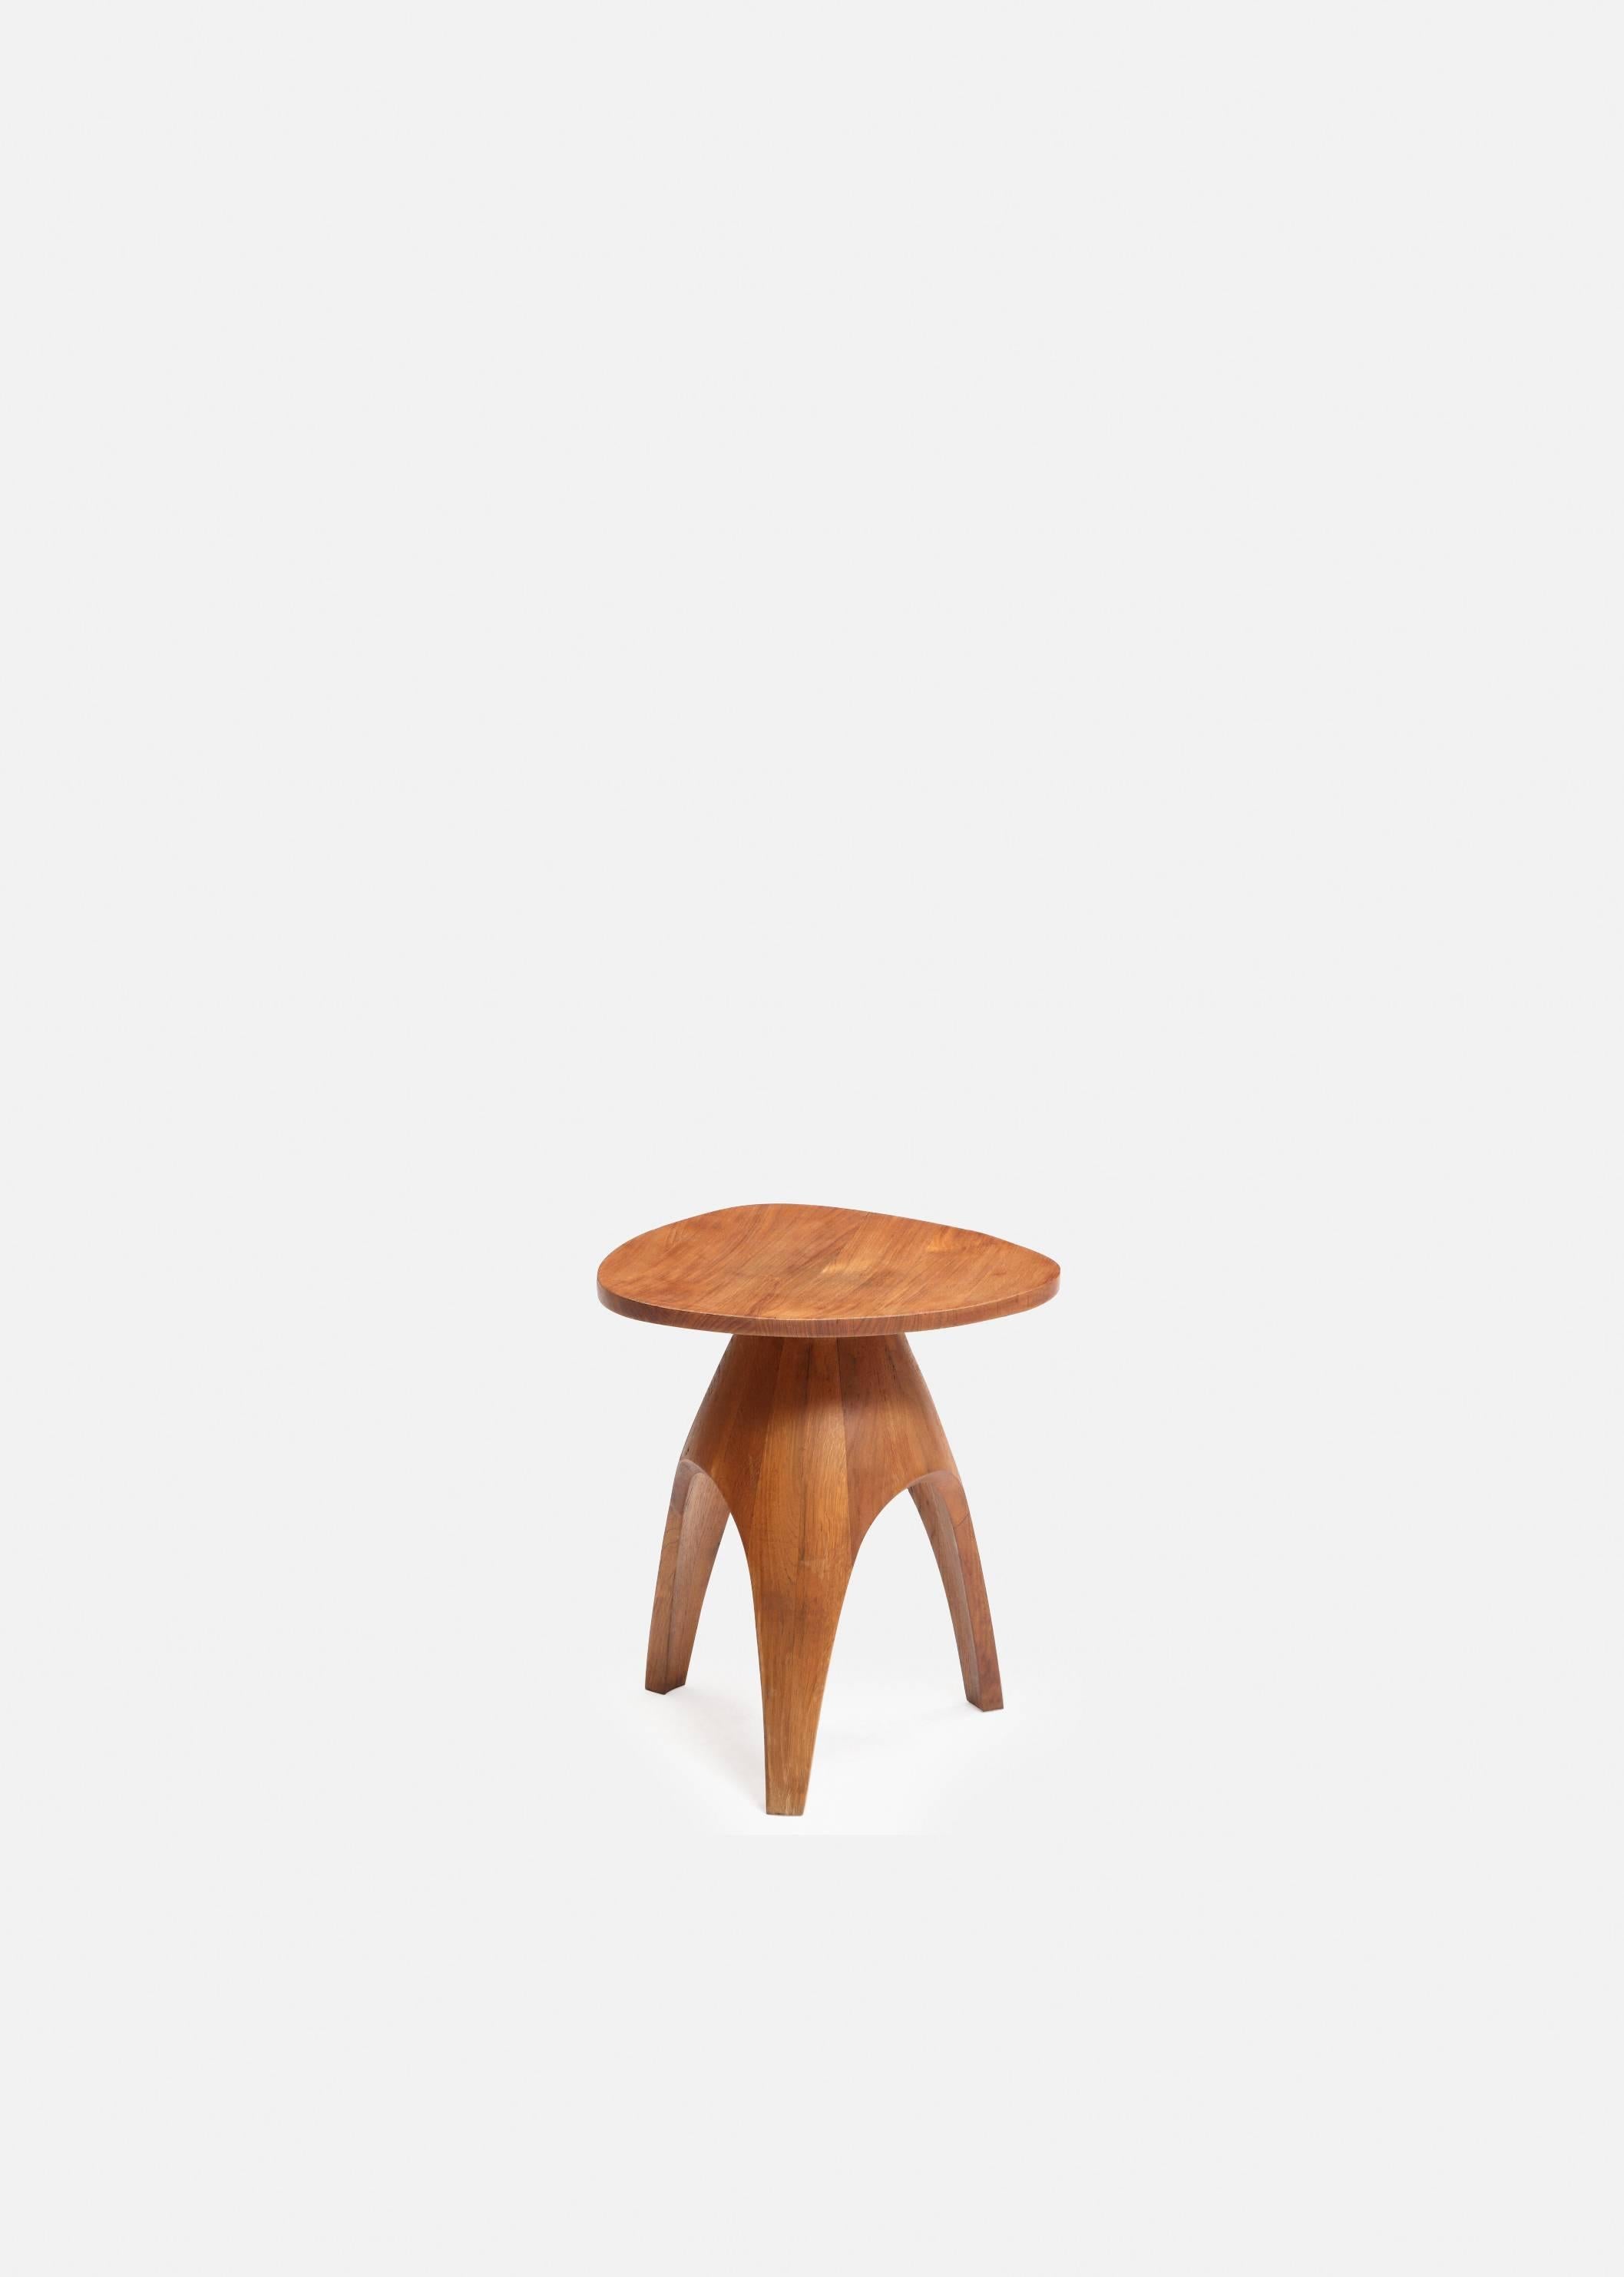 A rare Jens H. Quistgaard three-legged sculptural stool, with solid oak legs.

Stamped IHQ. Manufactured by Nissen, Langaa, 1950s.

H. 45 cm 
Diam. 41 cm.